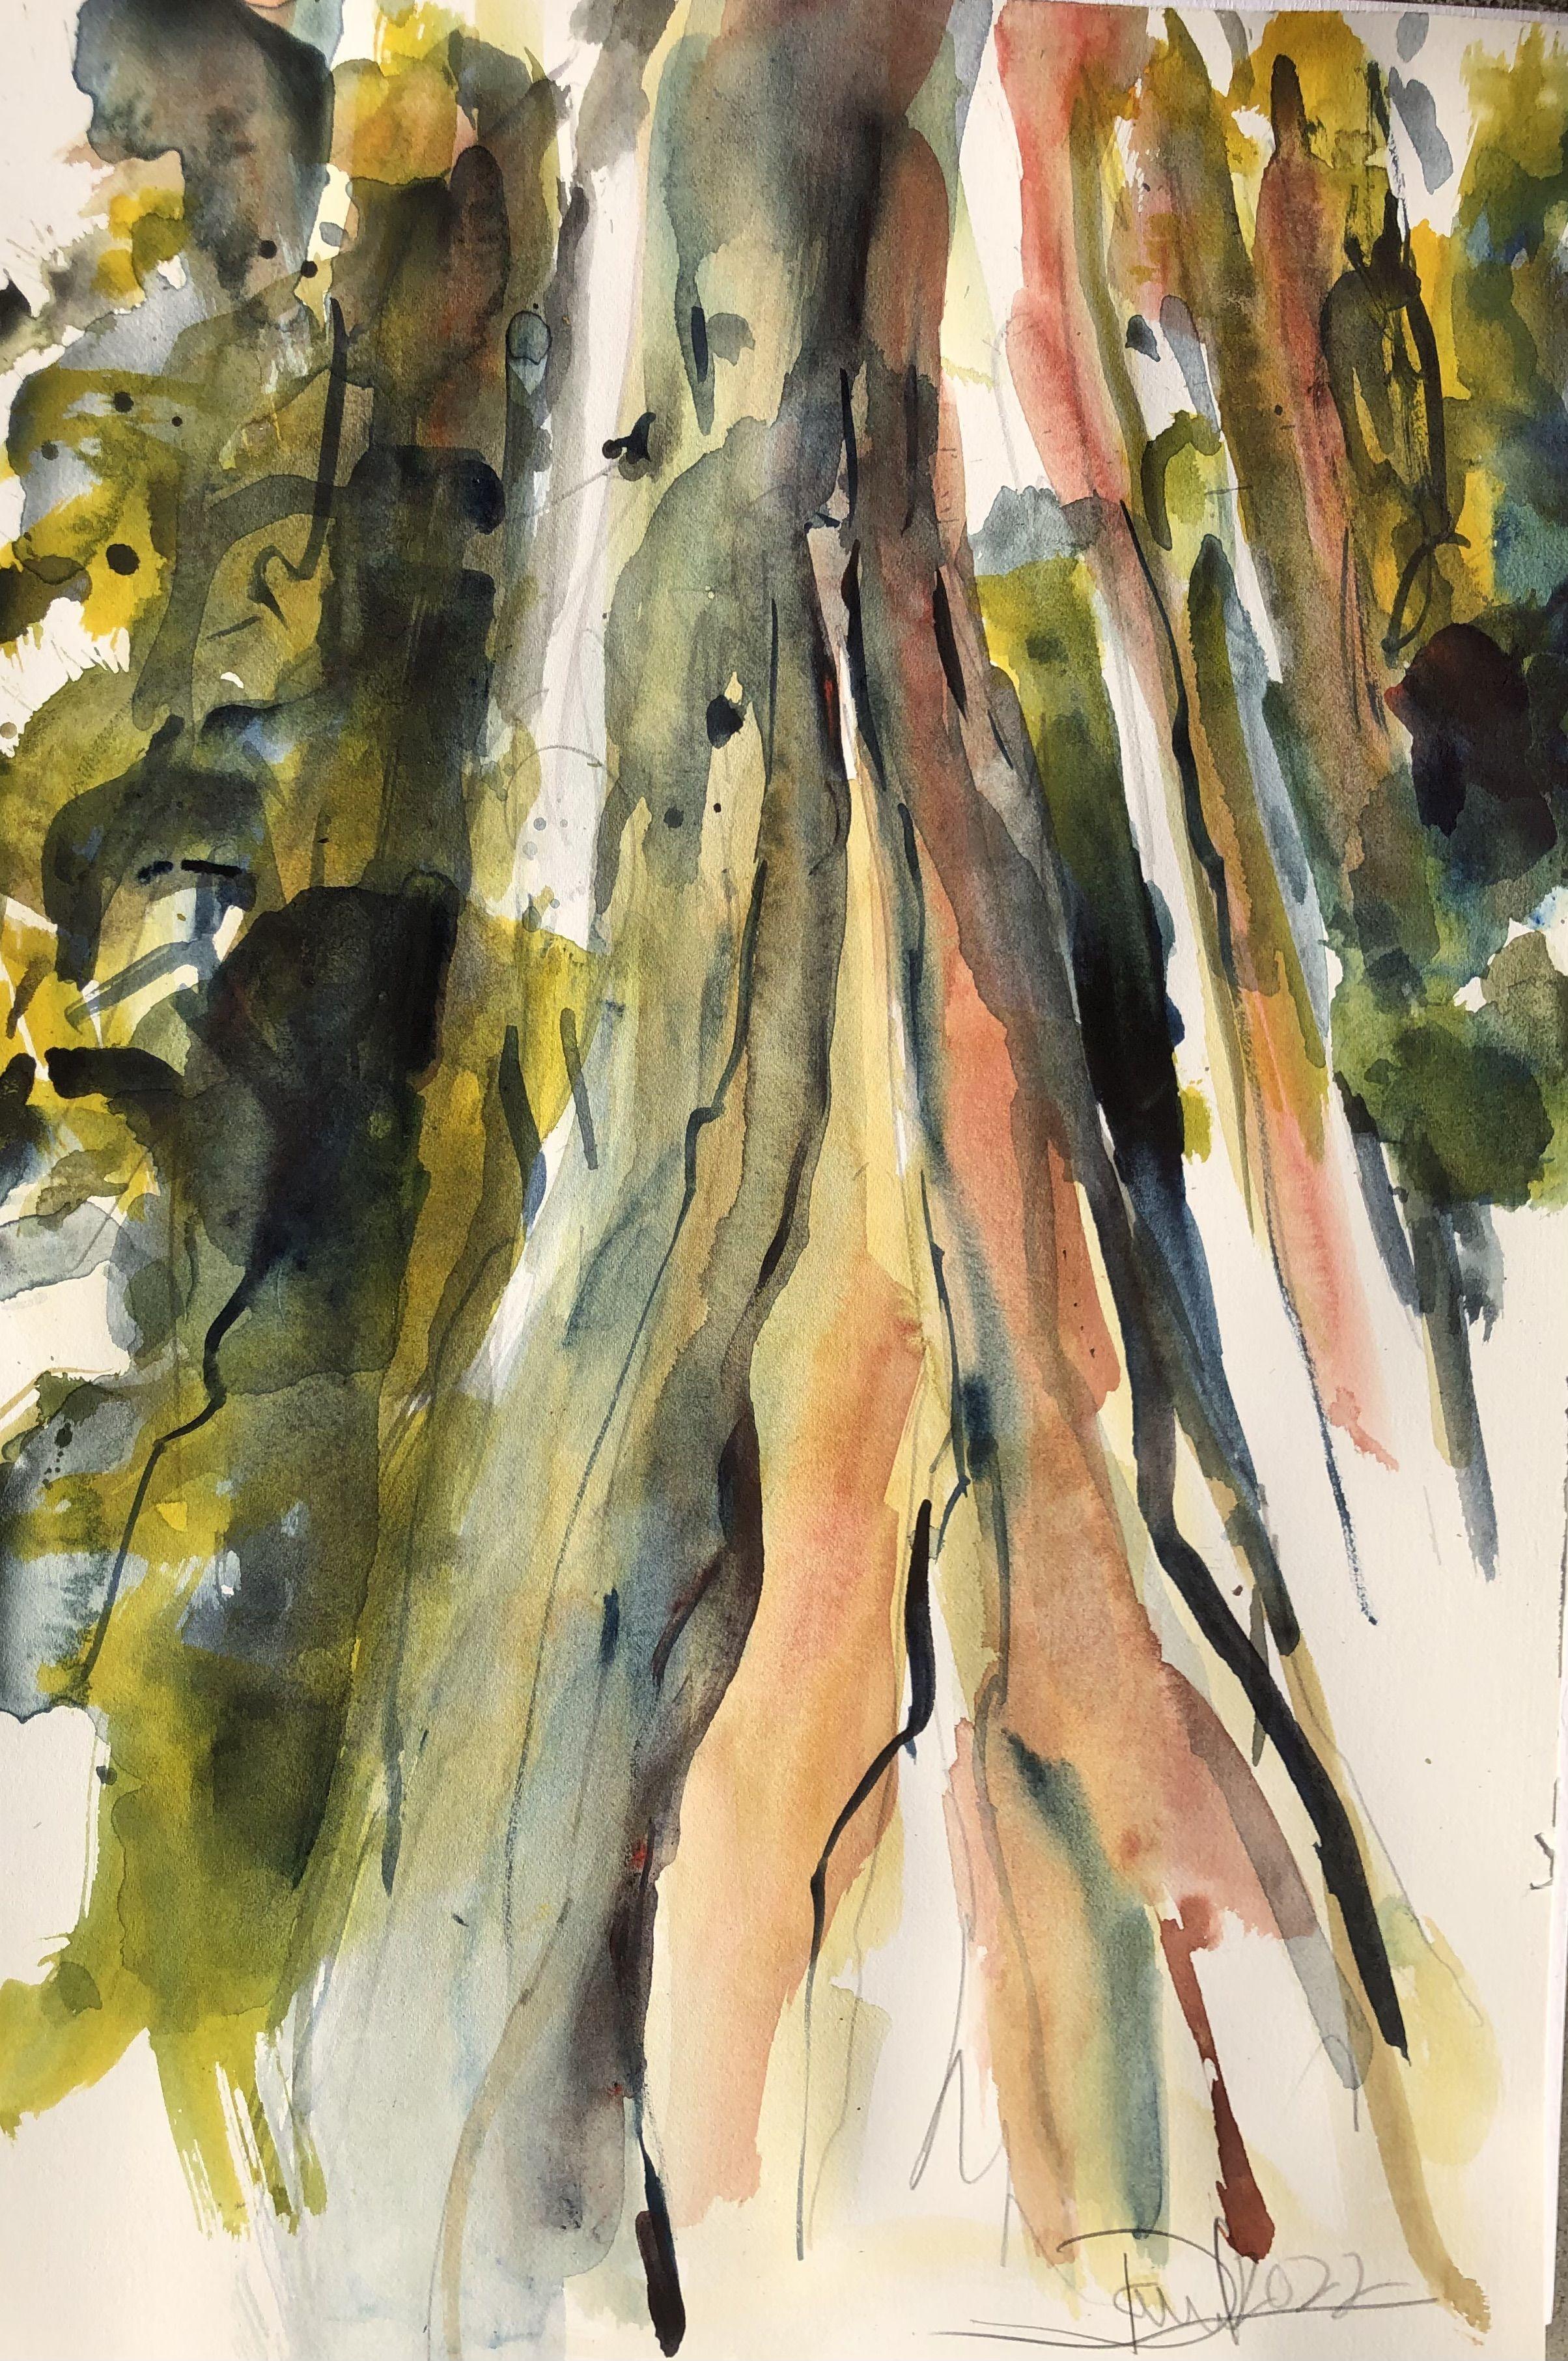 Redwoods, Humboldt County, Painting, Watercolor on Watercolor Paper - Art by Daniel Clarke